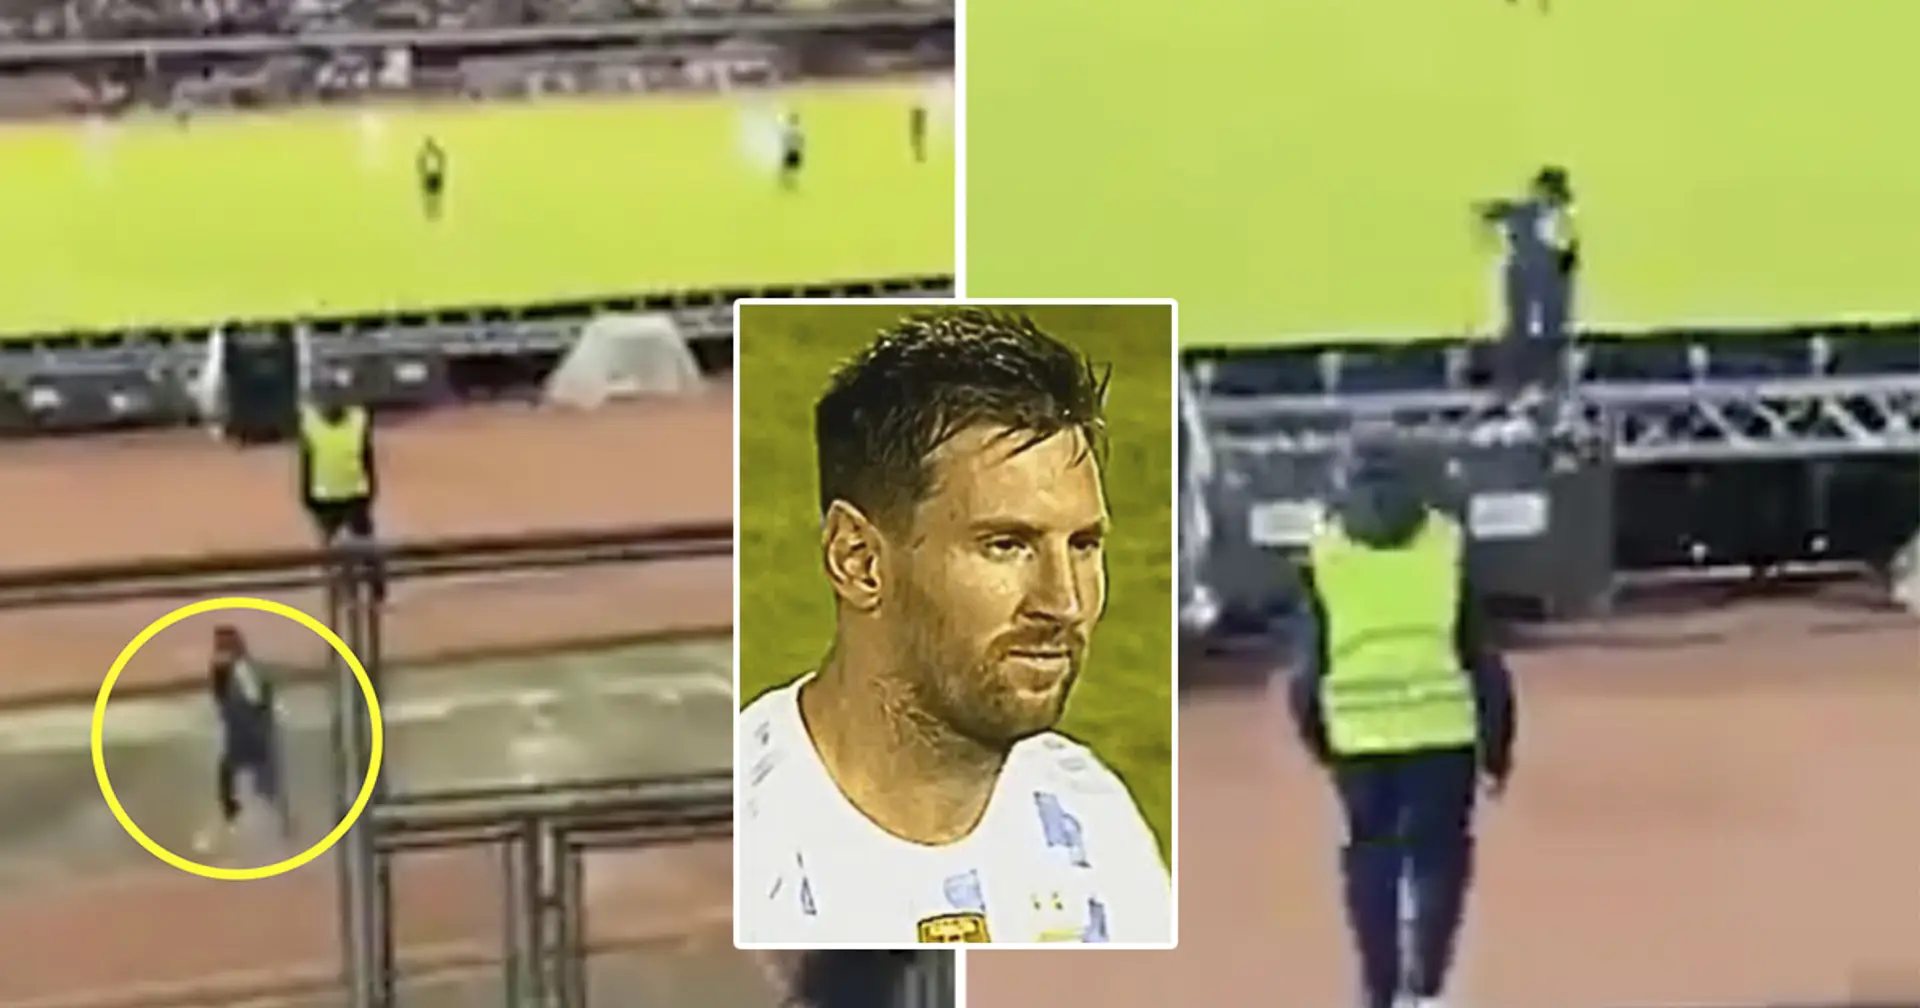 Little Venezuelan kid escapes stands to hug Messi at full time, Leo's reaction caught on camera